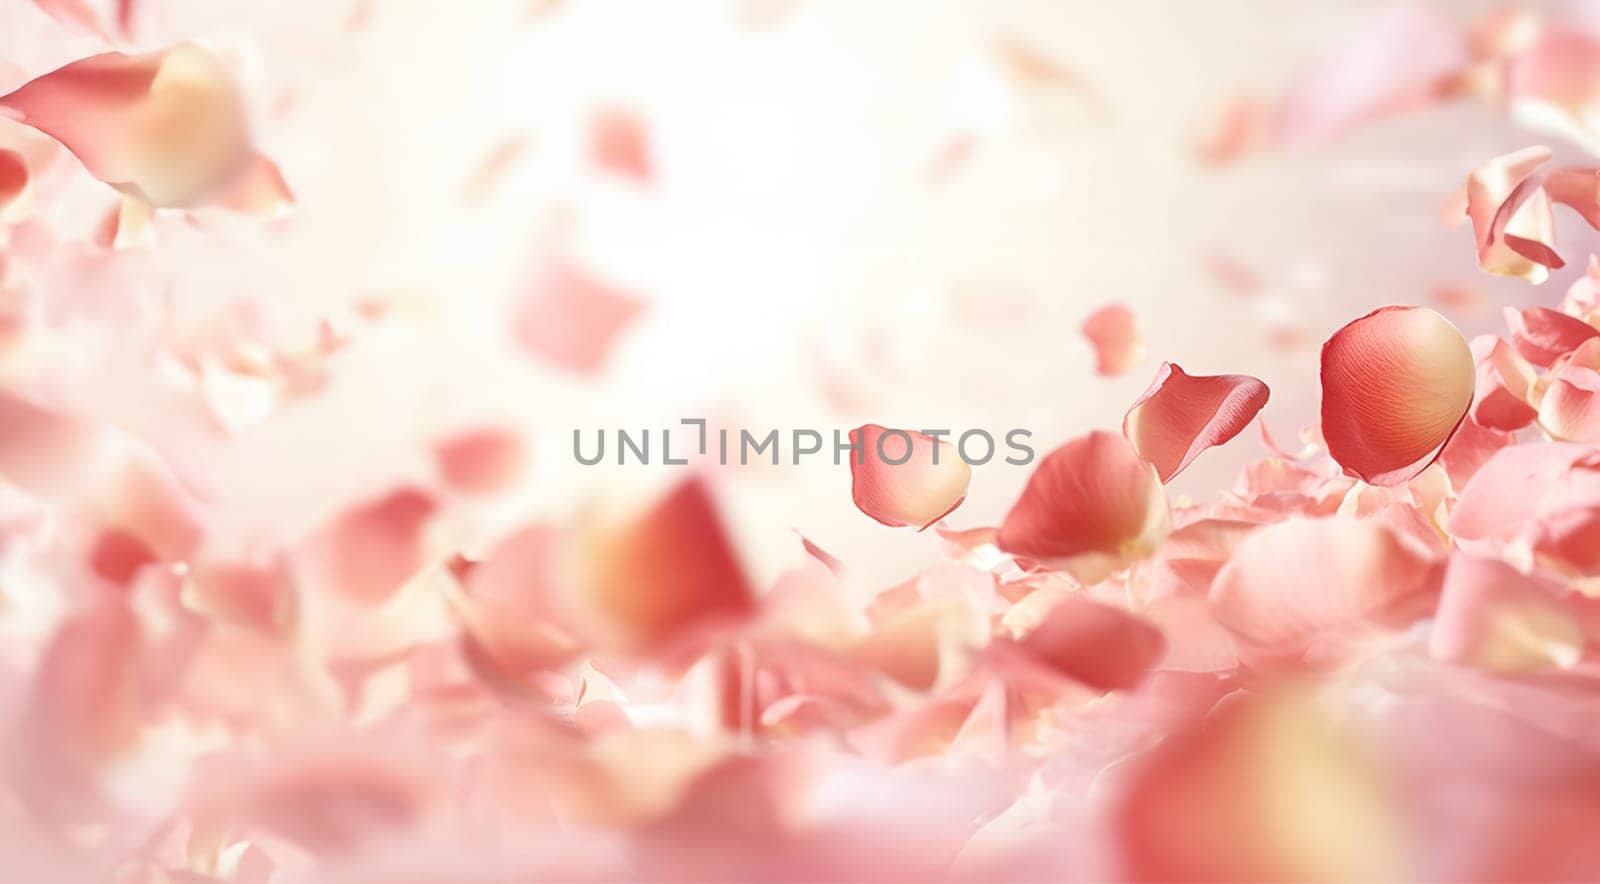 Pink rose petals on soft pink background. Petals of pink rose spa background. Realistic flying sakura cherry flower petals elements for romantic banner design. Copy space Valentine's Day concept. by Annebel146